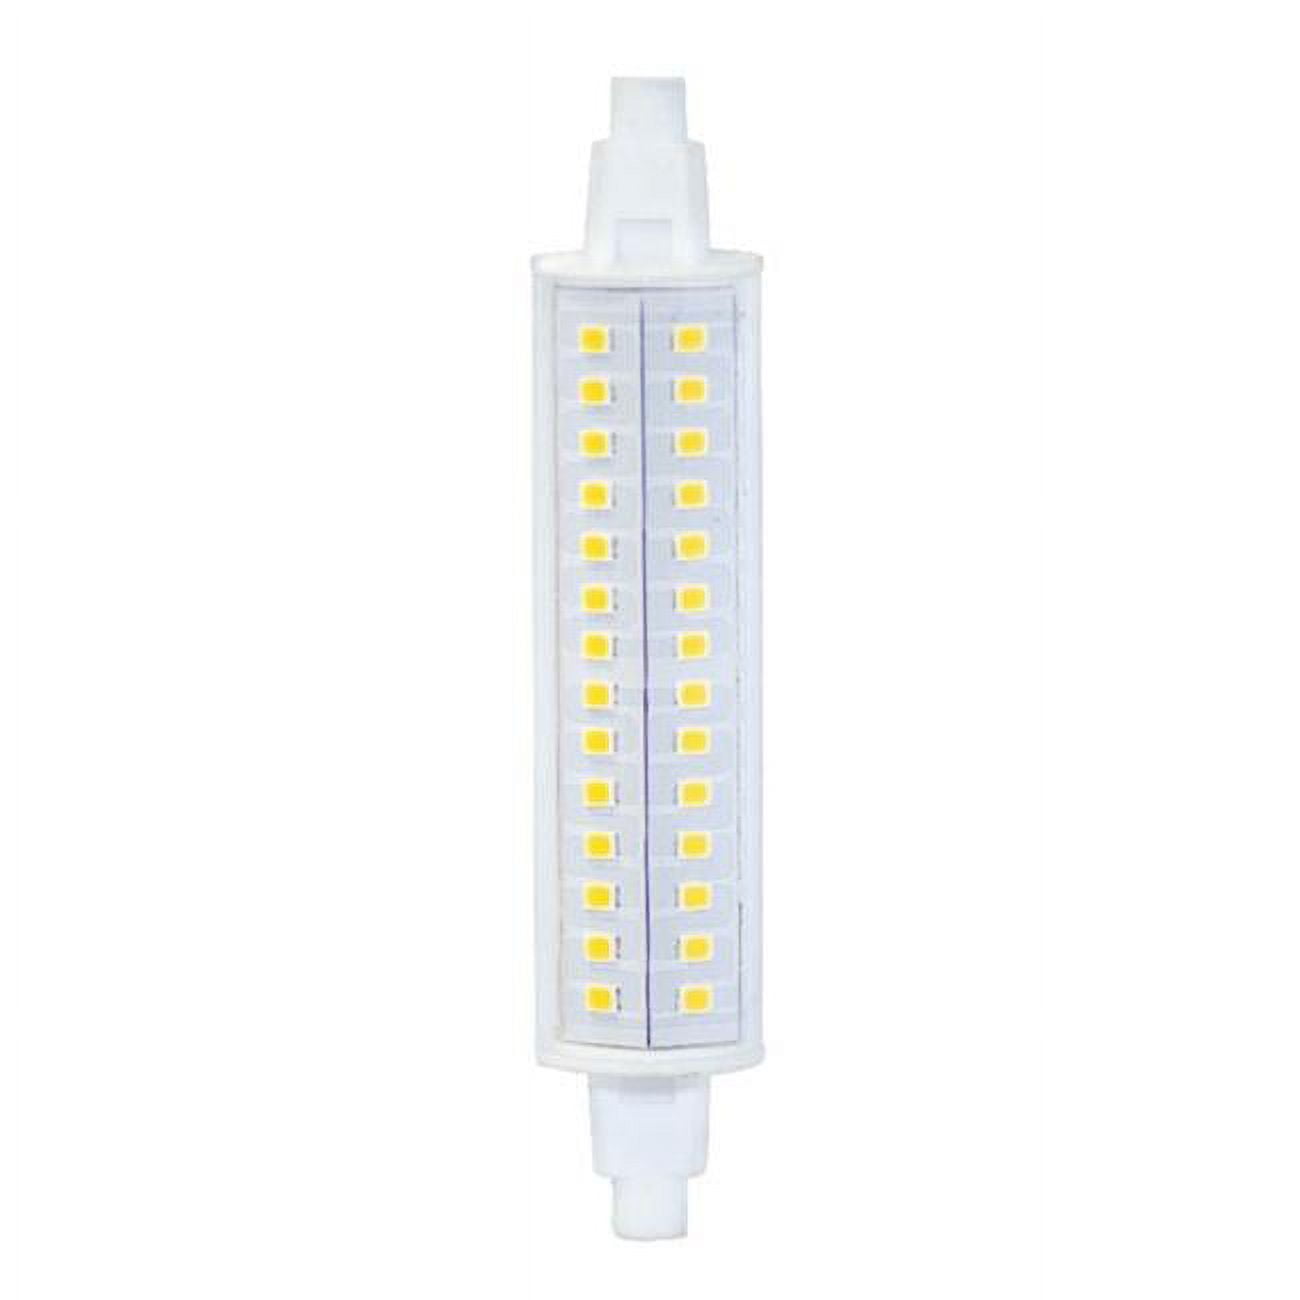 Picture of Bulbrite Pack of (2) 10 Watt 120V Dimmable Clear J-TYPE LED Mini Light Bulbs with Recessed Single Contact (R7S) Base  3000K Soft White Light  1100 Lumens